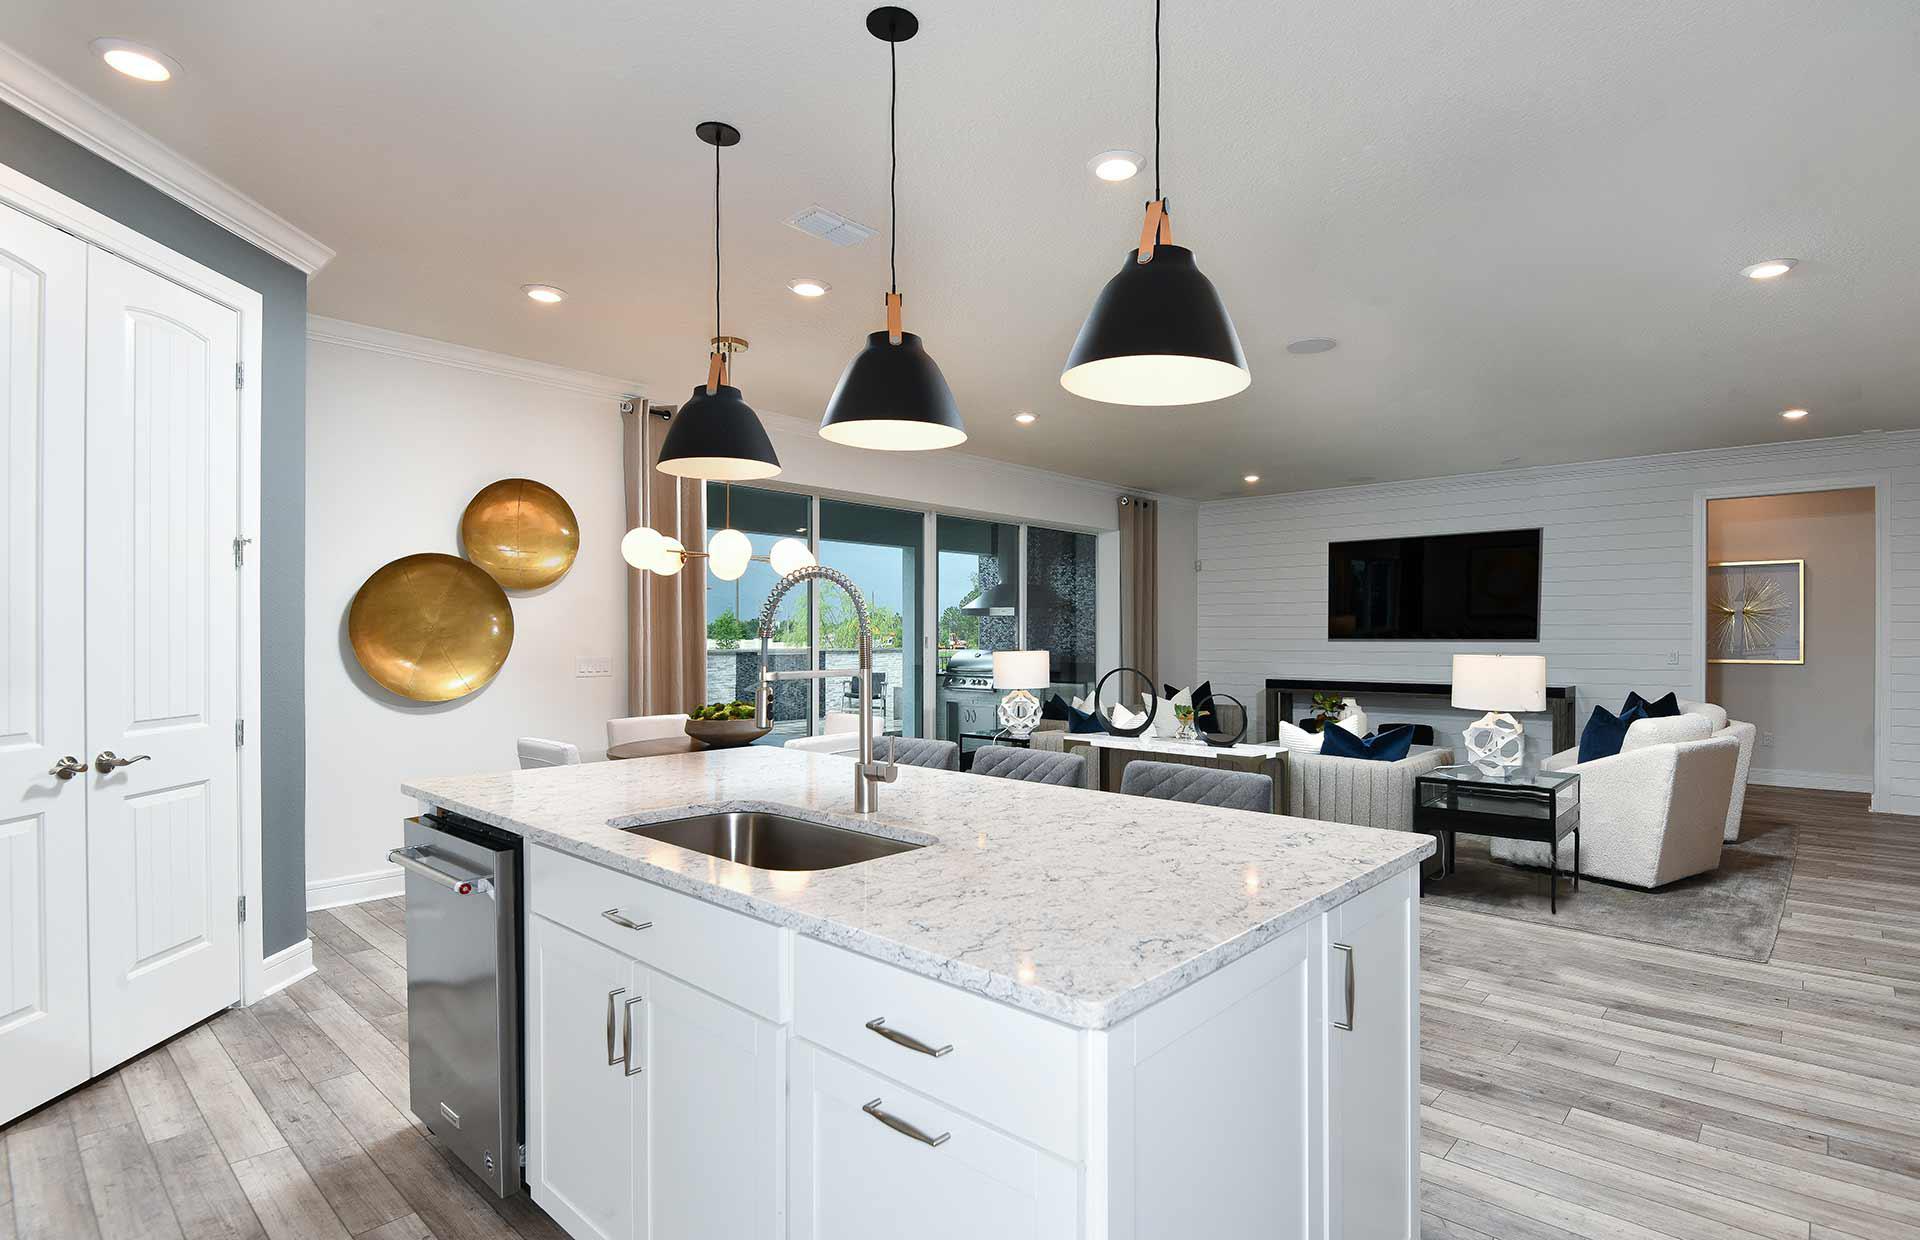 Image 14 | Isles of Lake Nona by Pulte Homes